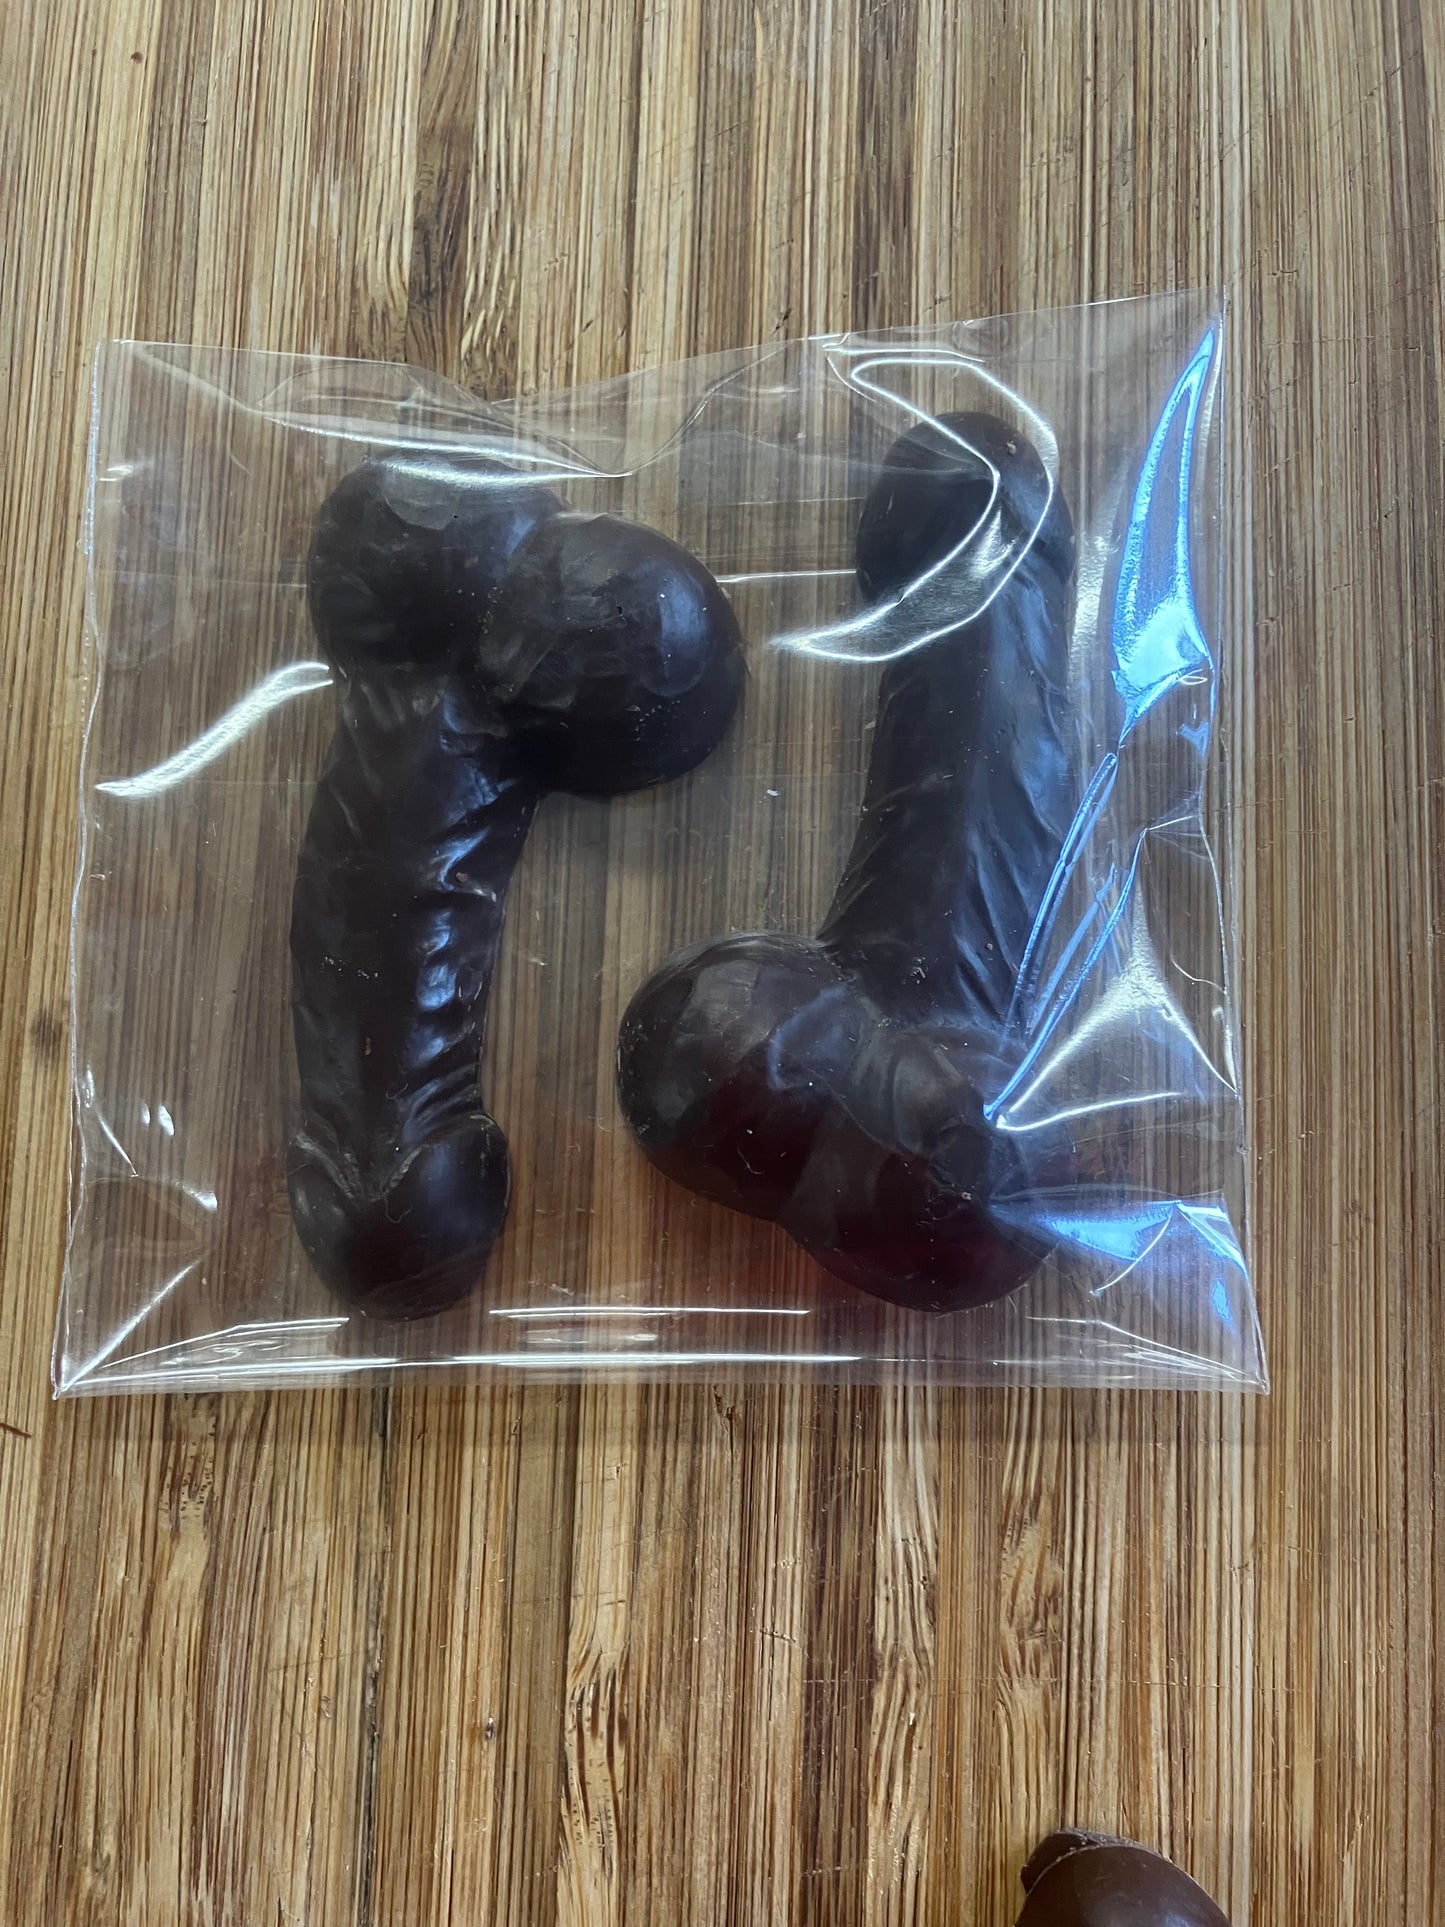 Solid Chocolate "Body Parts”